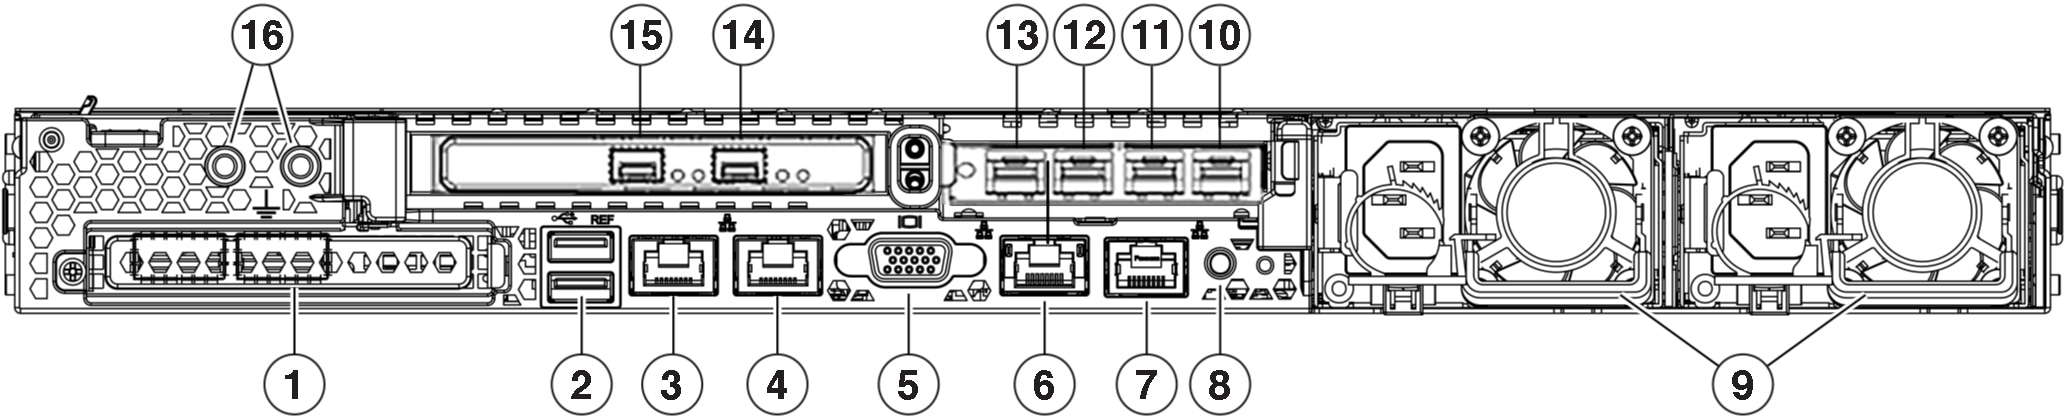 Image of the rear panel of the 44- and 56-core appliance